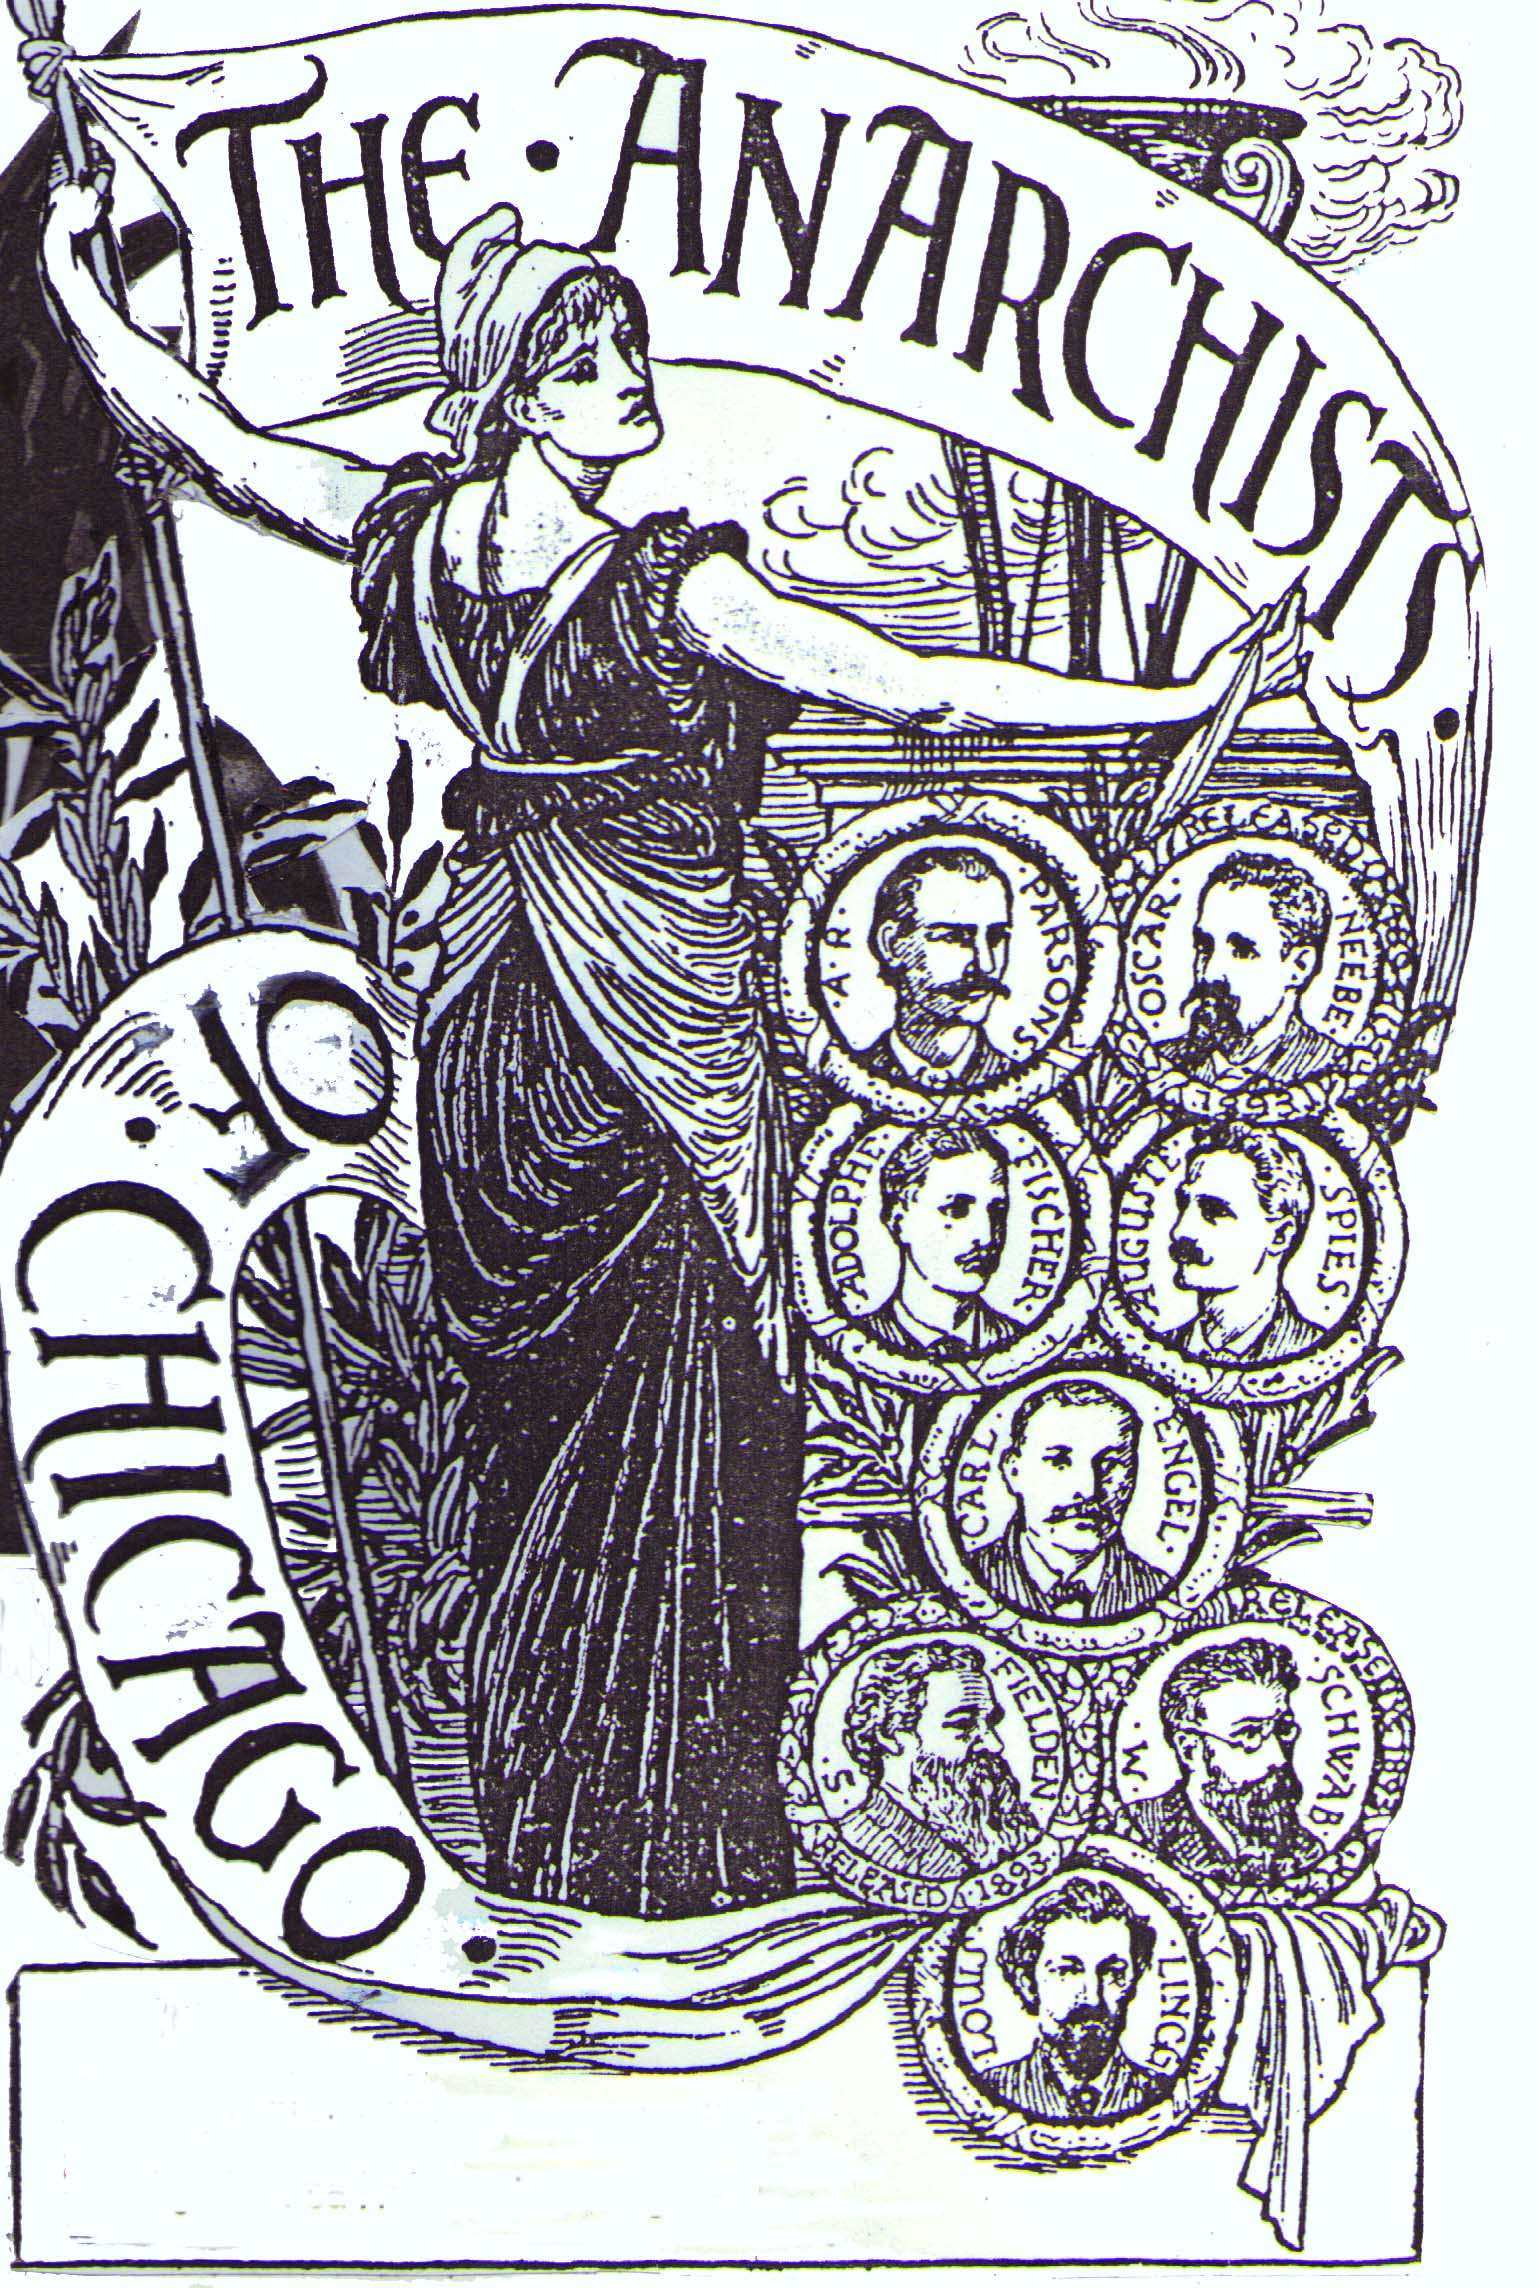 This sympathetic engraving by English Arts and Crafts illustrator Walter Crane of "The Anarchists of Chicago" was widely circulated among anarchists, socialists, and labor activists.